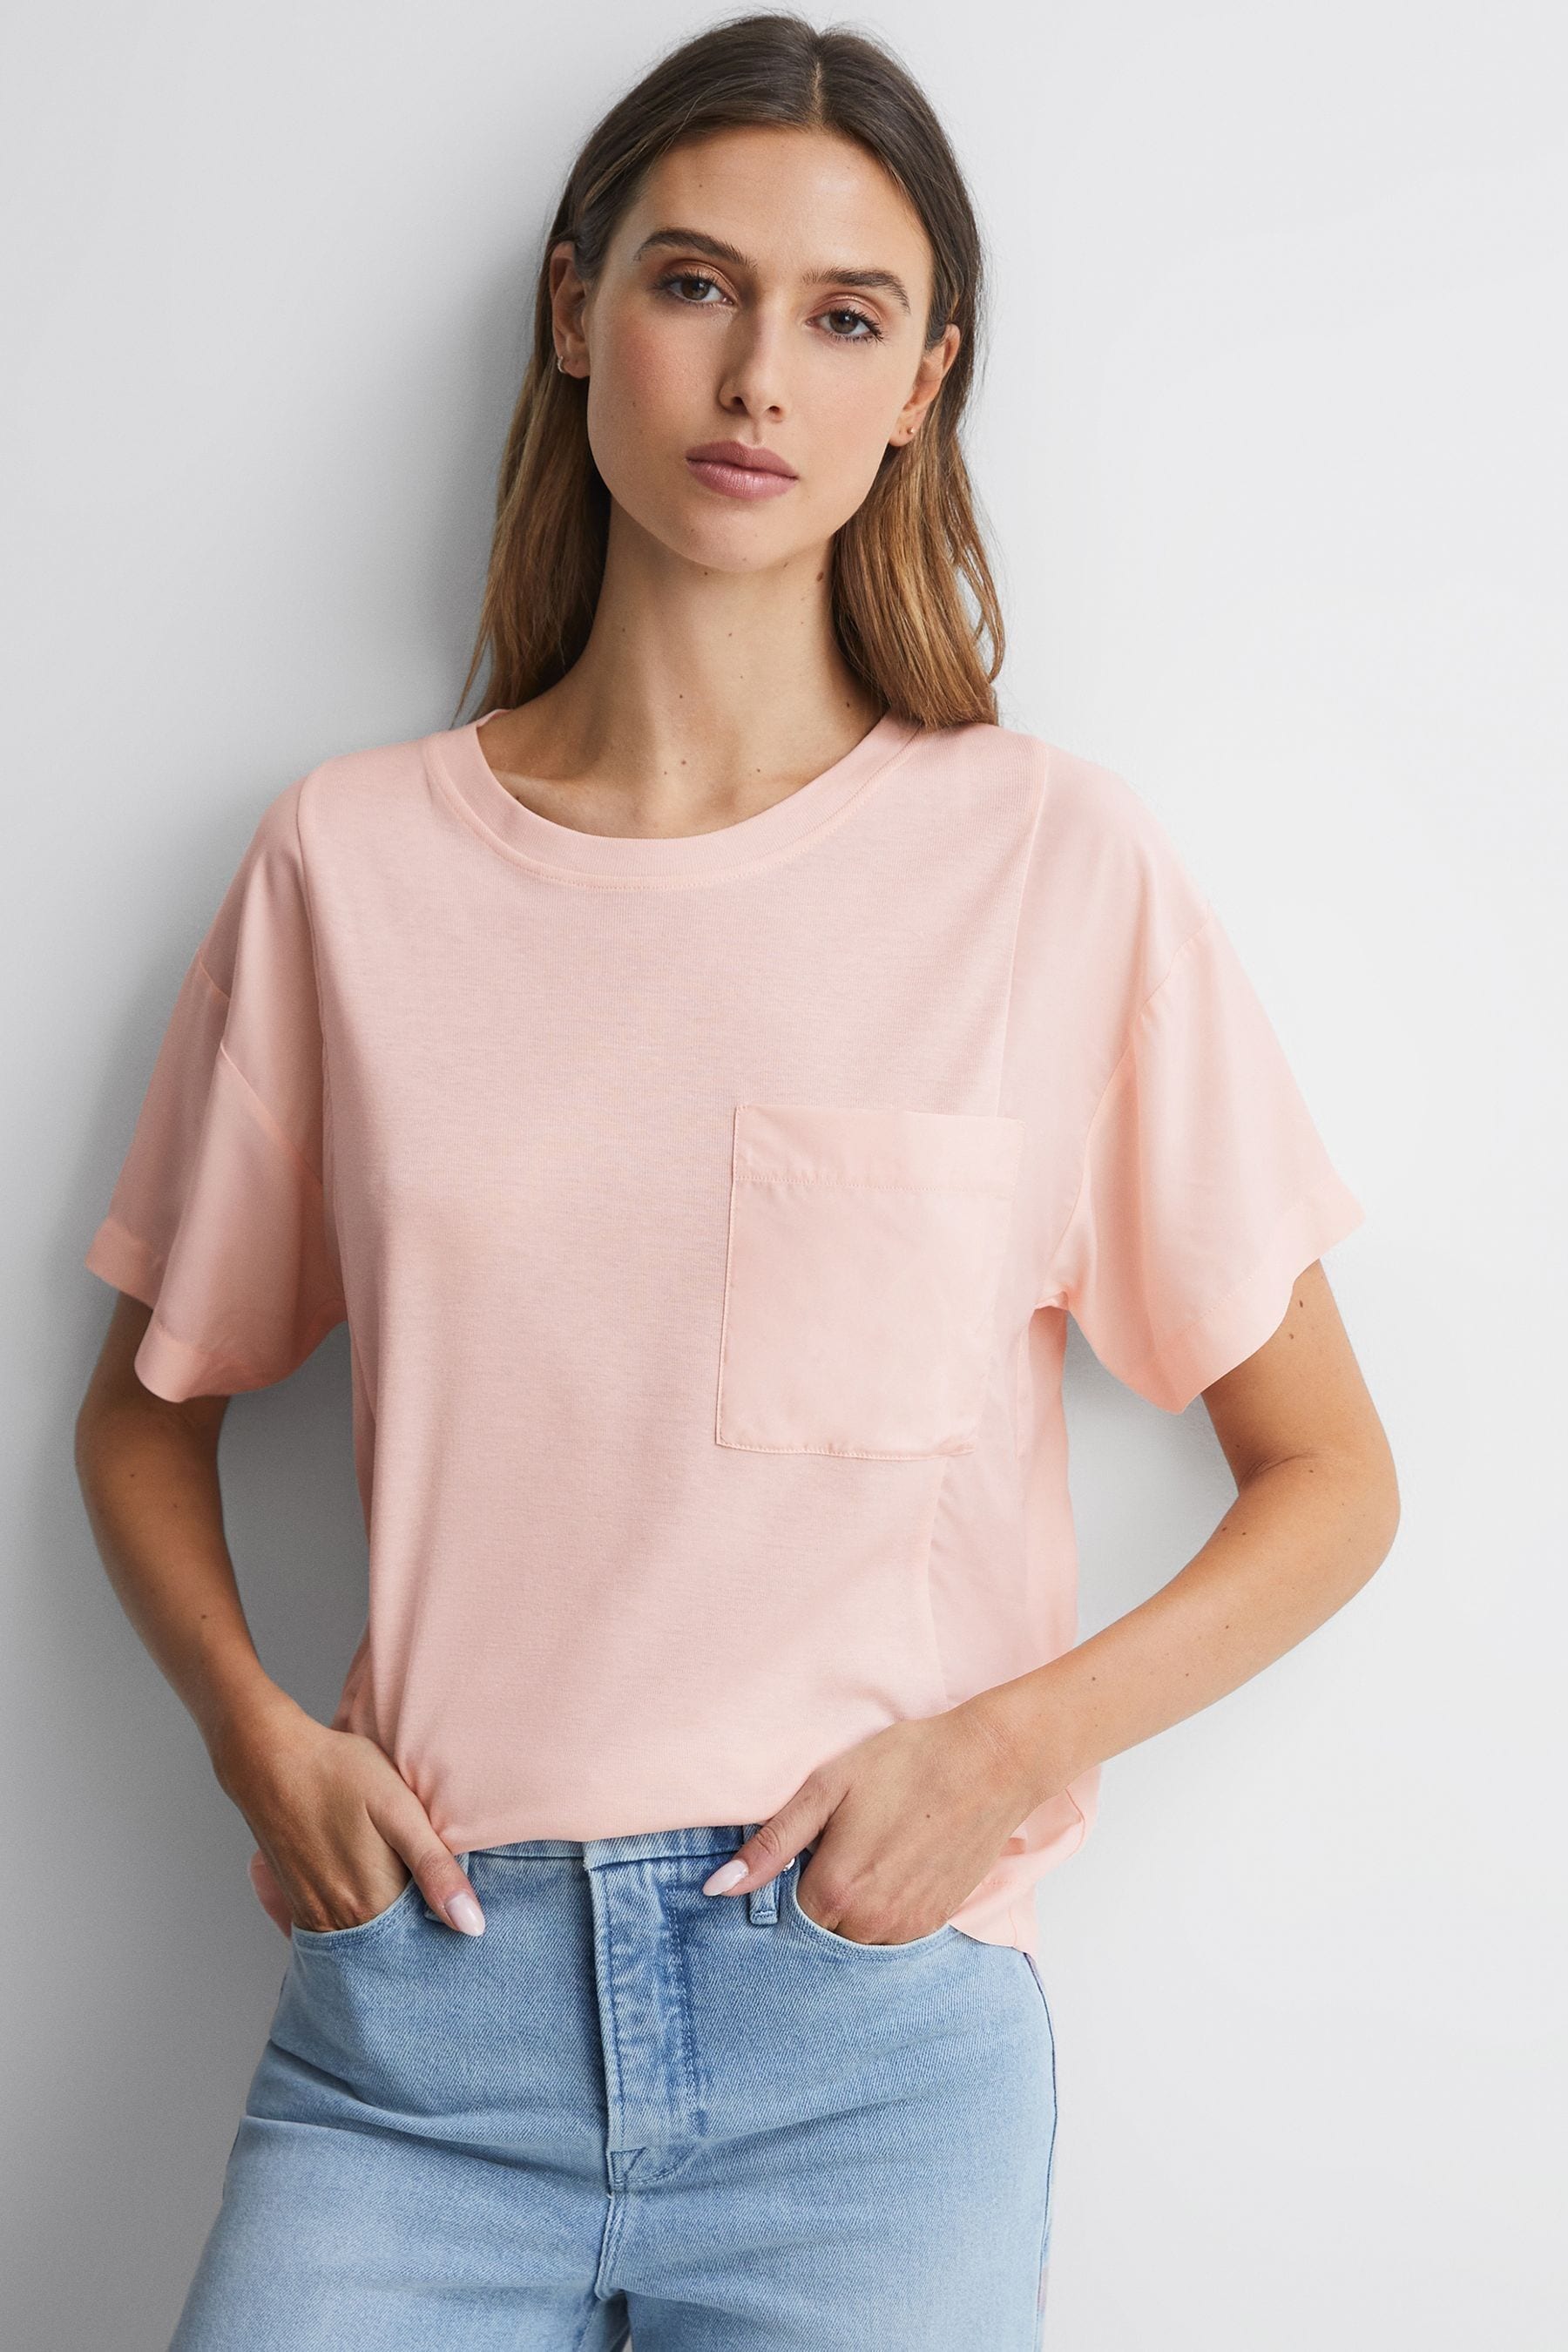 Reiss Sofia In Pink